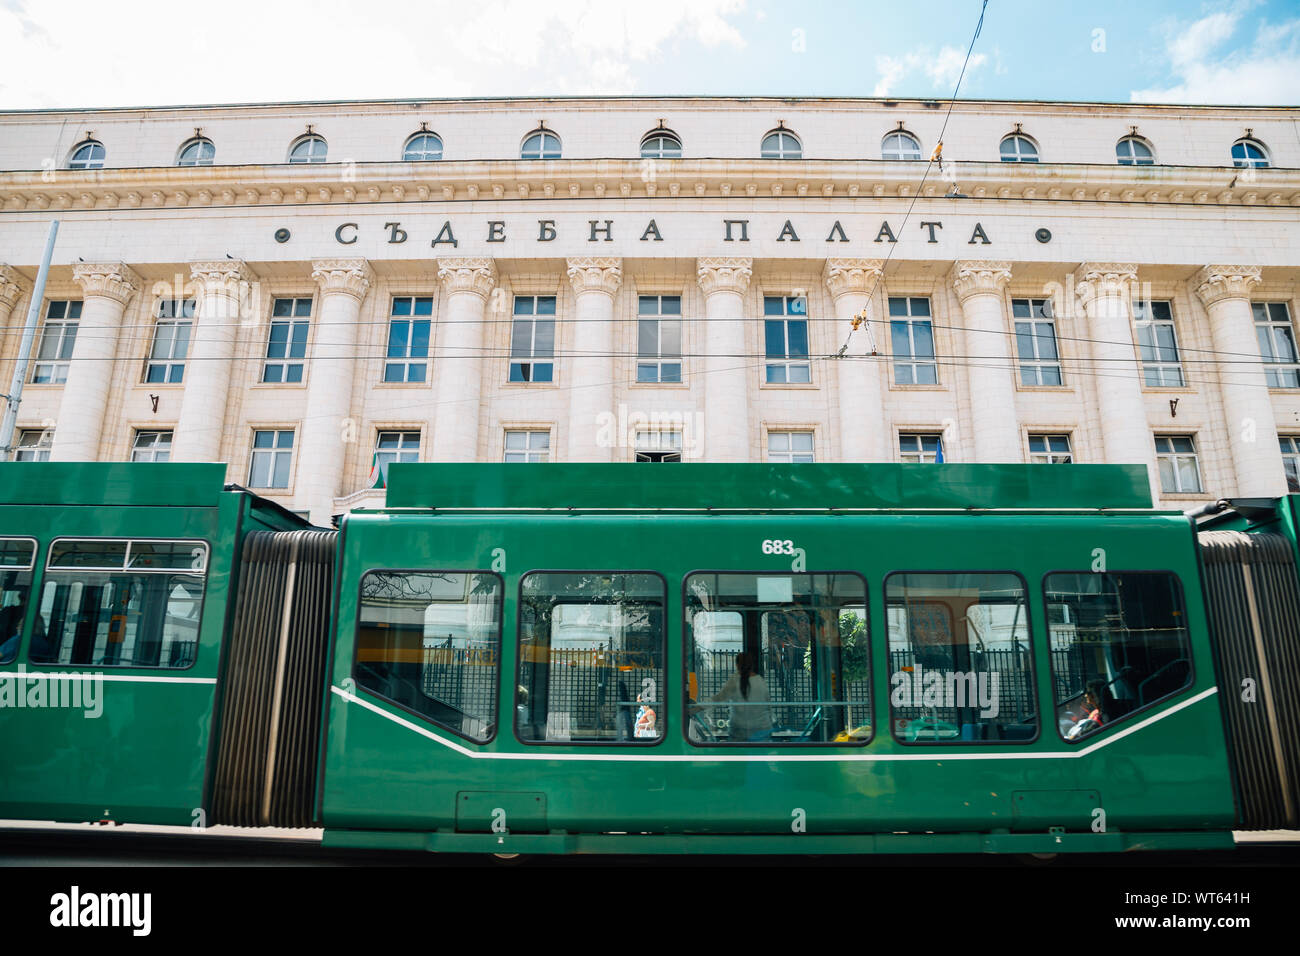 Sofia, Bulgaria - August 4, 2019 : City Court house (Palace of Justice) and green tram Stock Photo